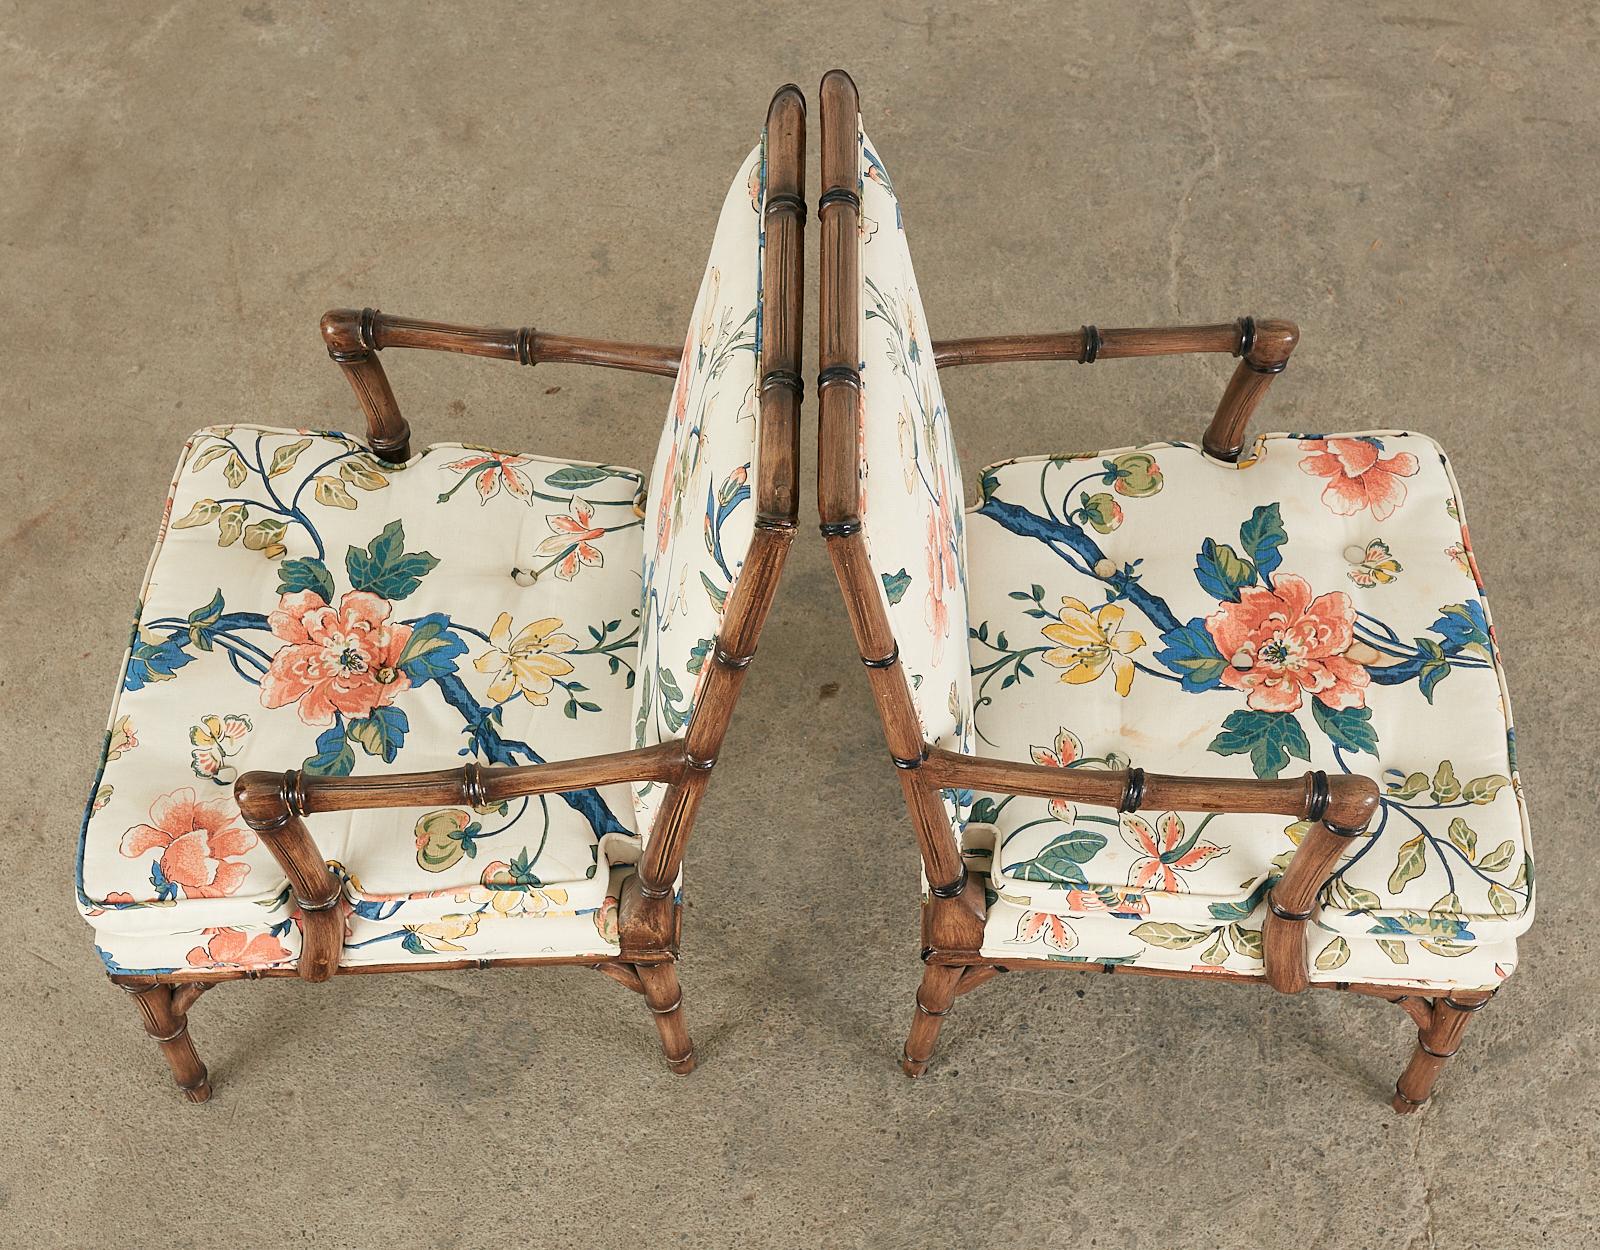 Fabric Bob Hope's Set of Four Faux Bamboo Chintz Dining Chairs